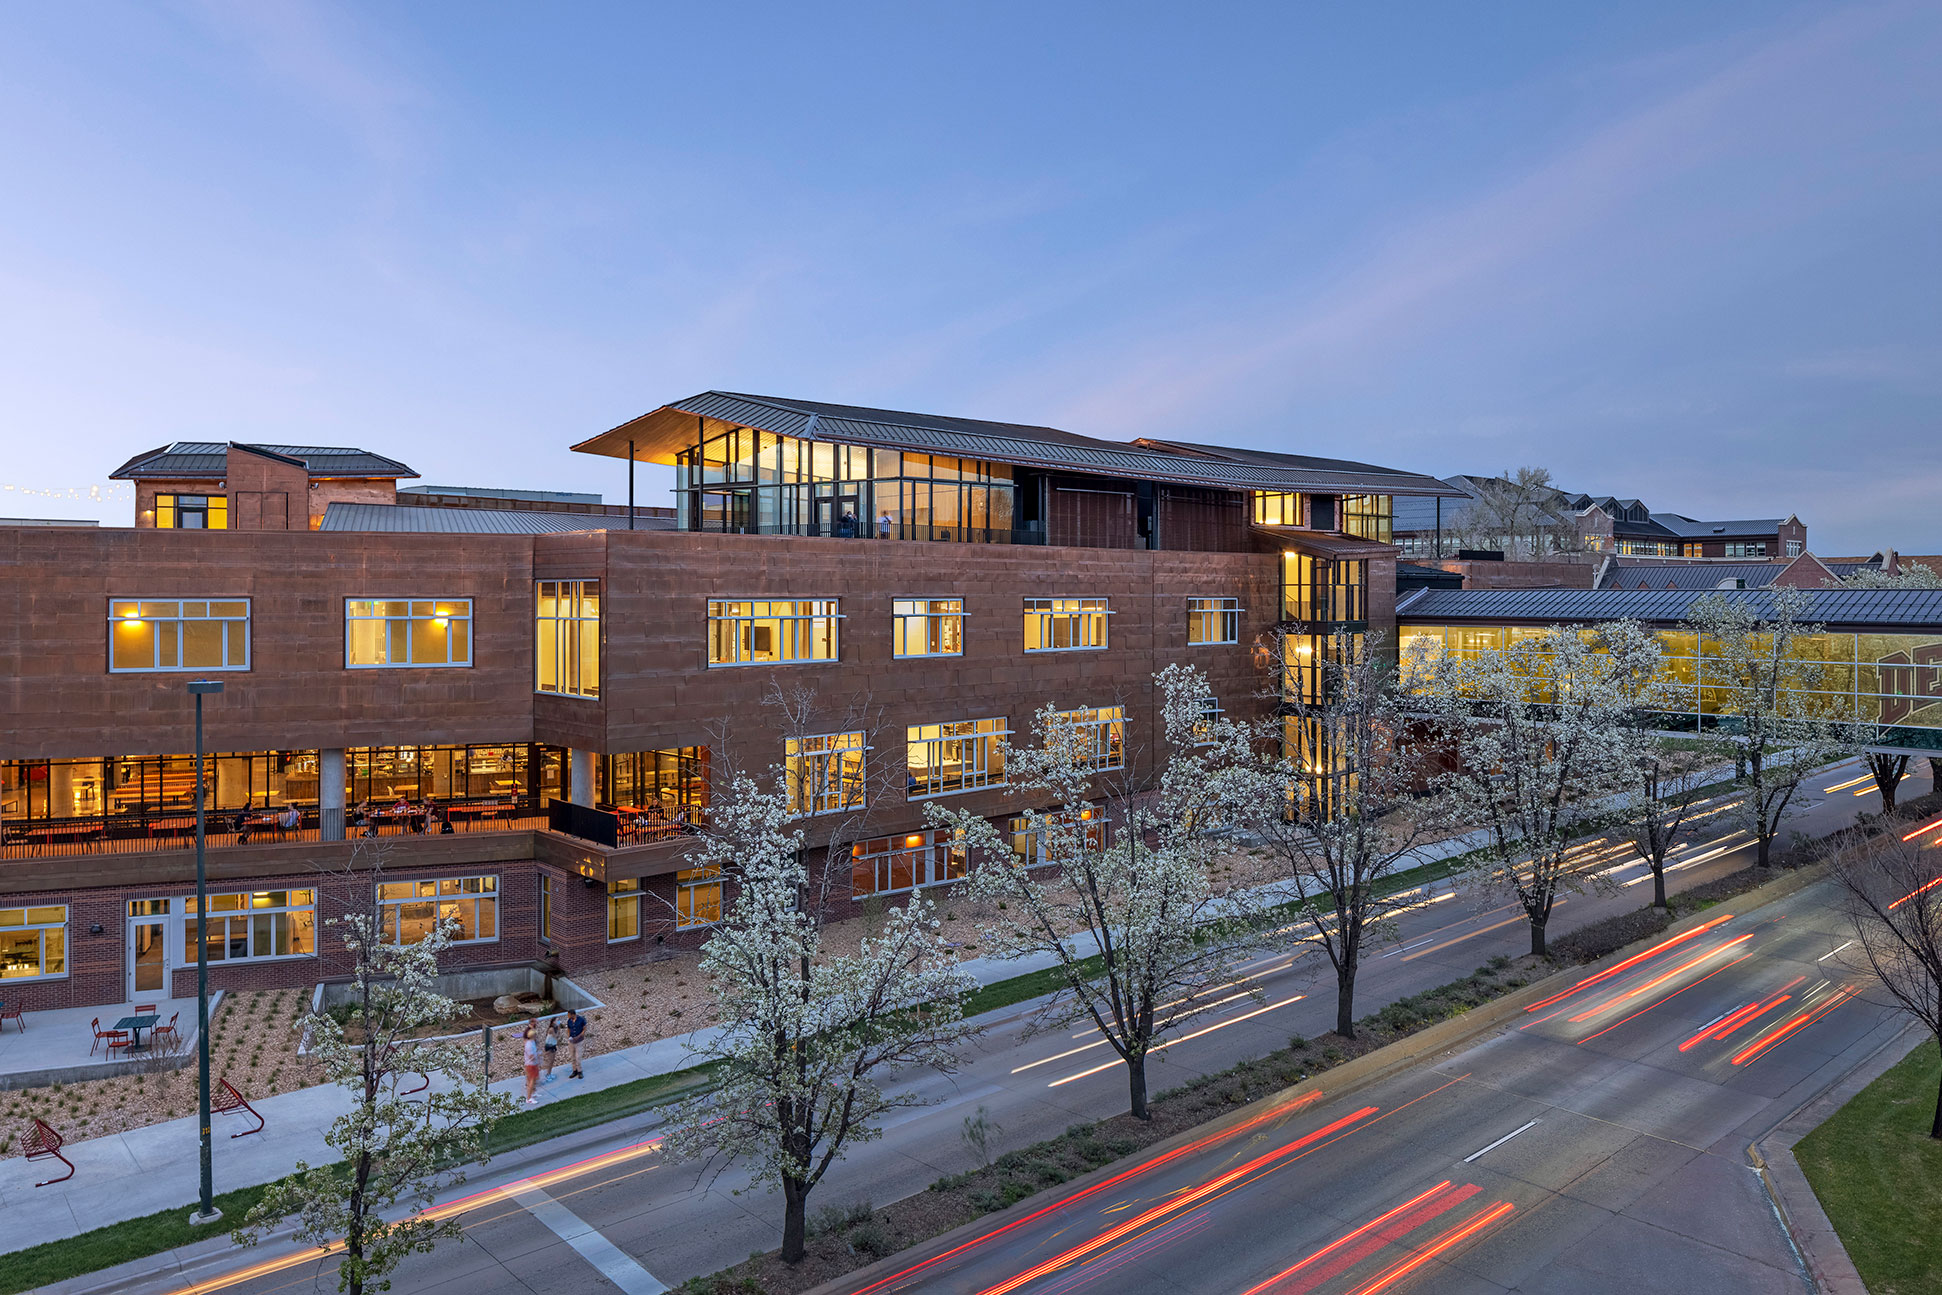 Canyons Inspired the New Community Commons at the University of Denver